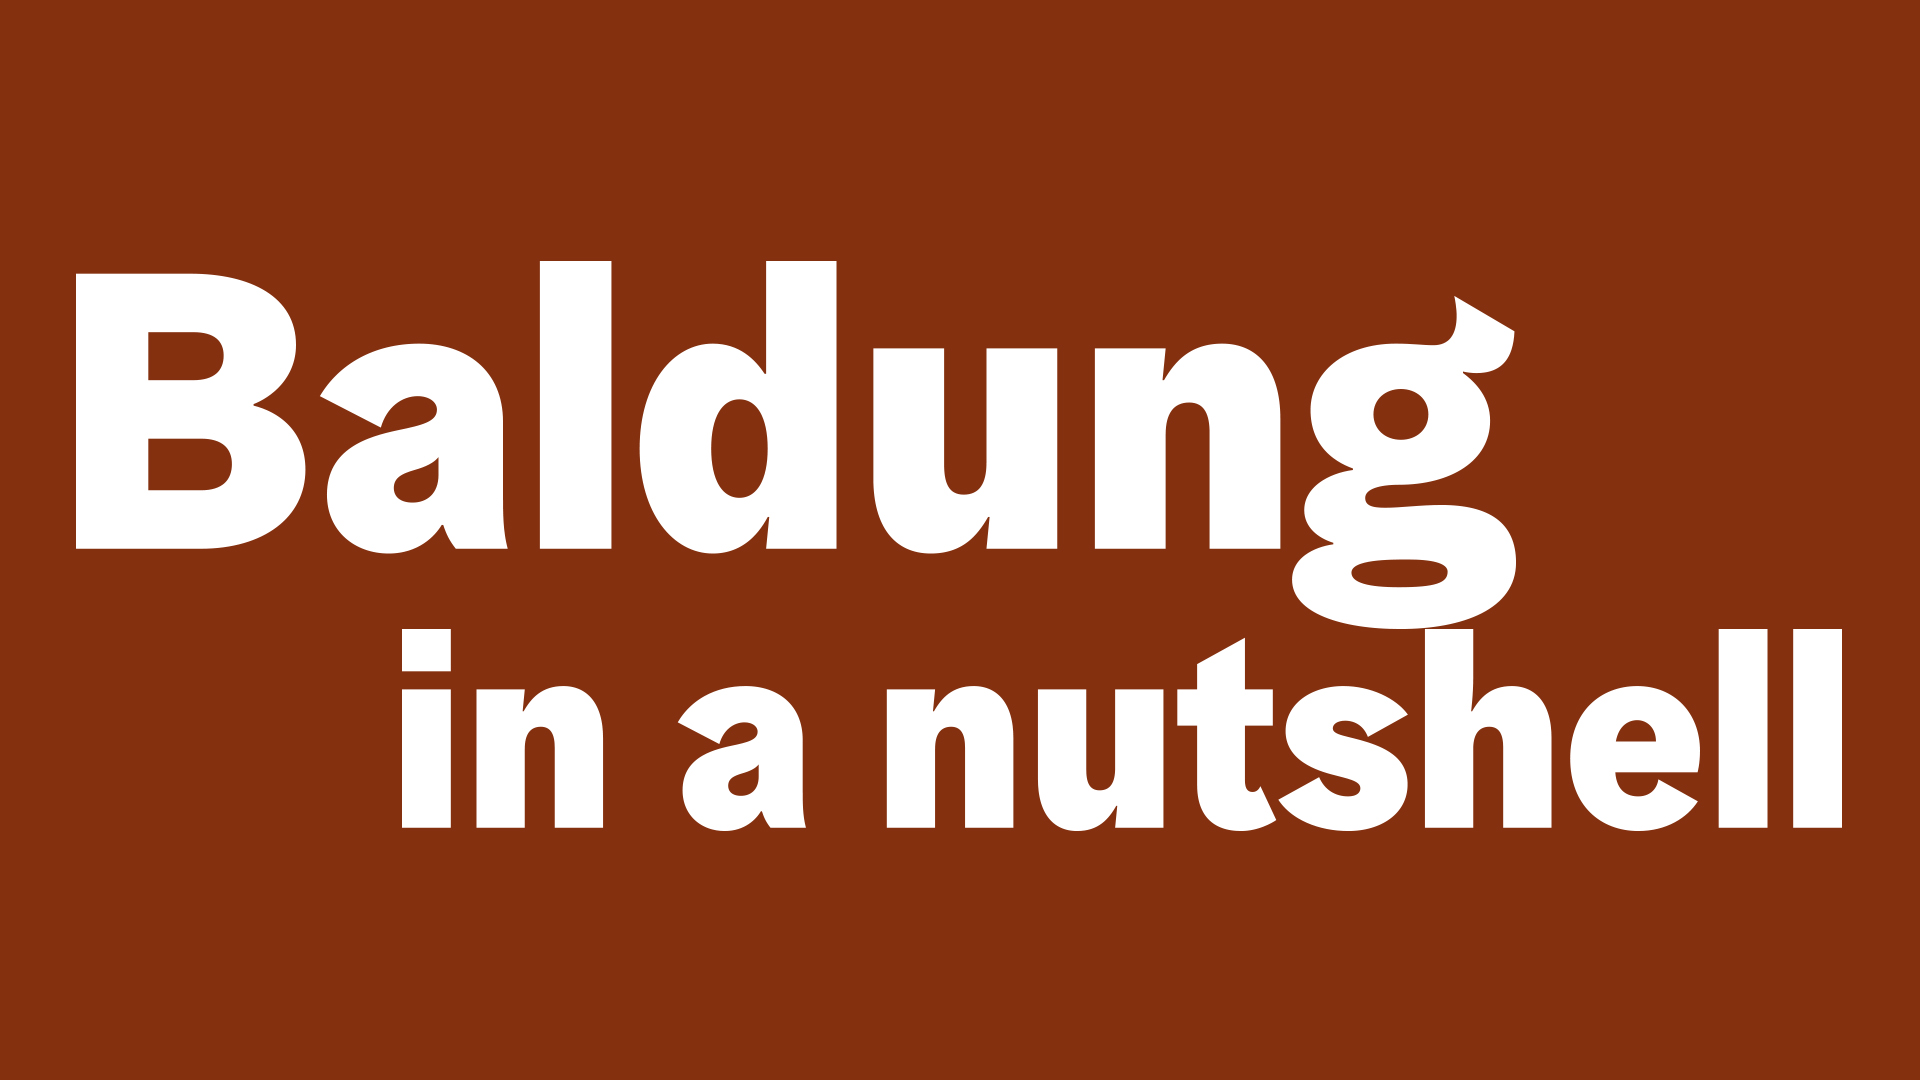 Image in rust red reading Baldung in a nutshell used as header for the digital offer of the same name